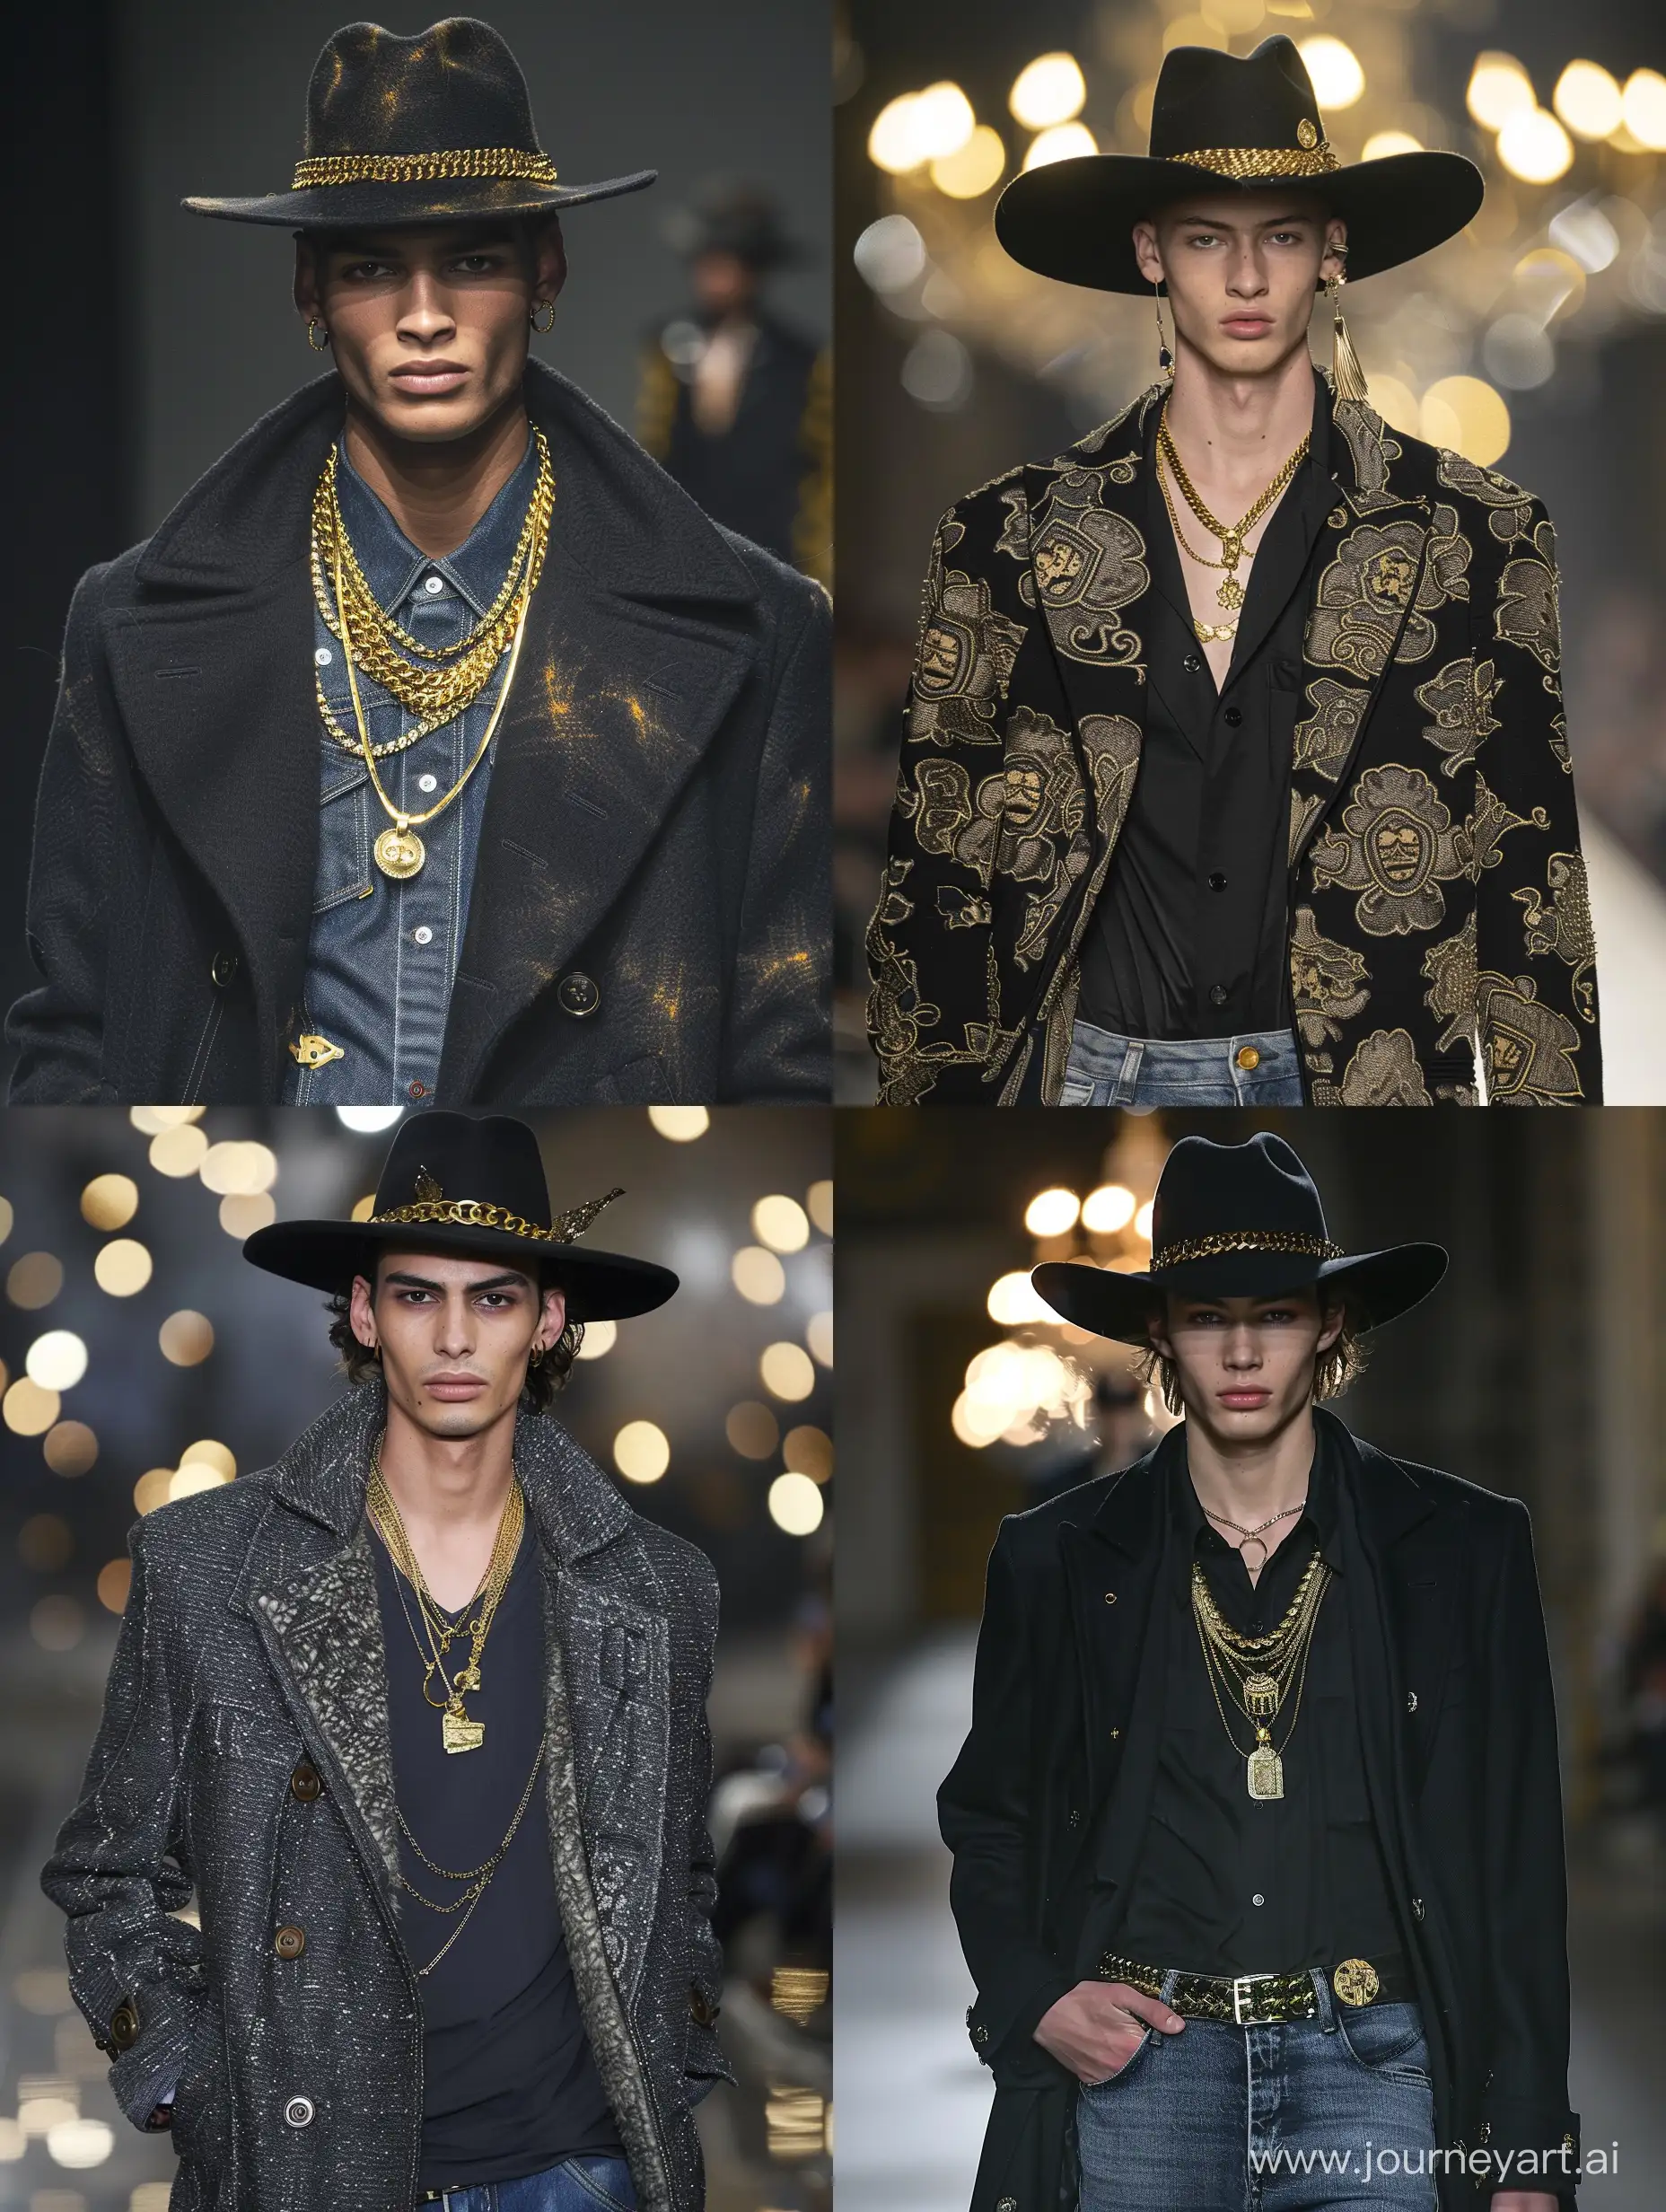 Fashionable-Male-Model-in-Slim-Fit-Runway-Attire-with-Gold-Jewelry-and-Hats